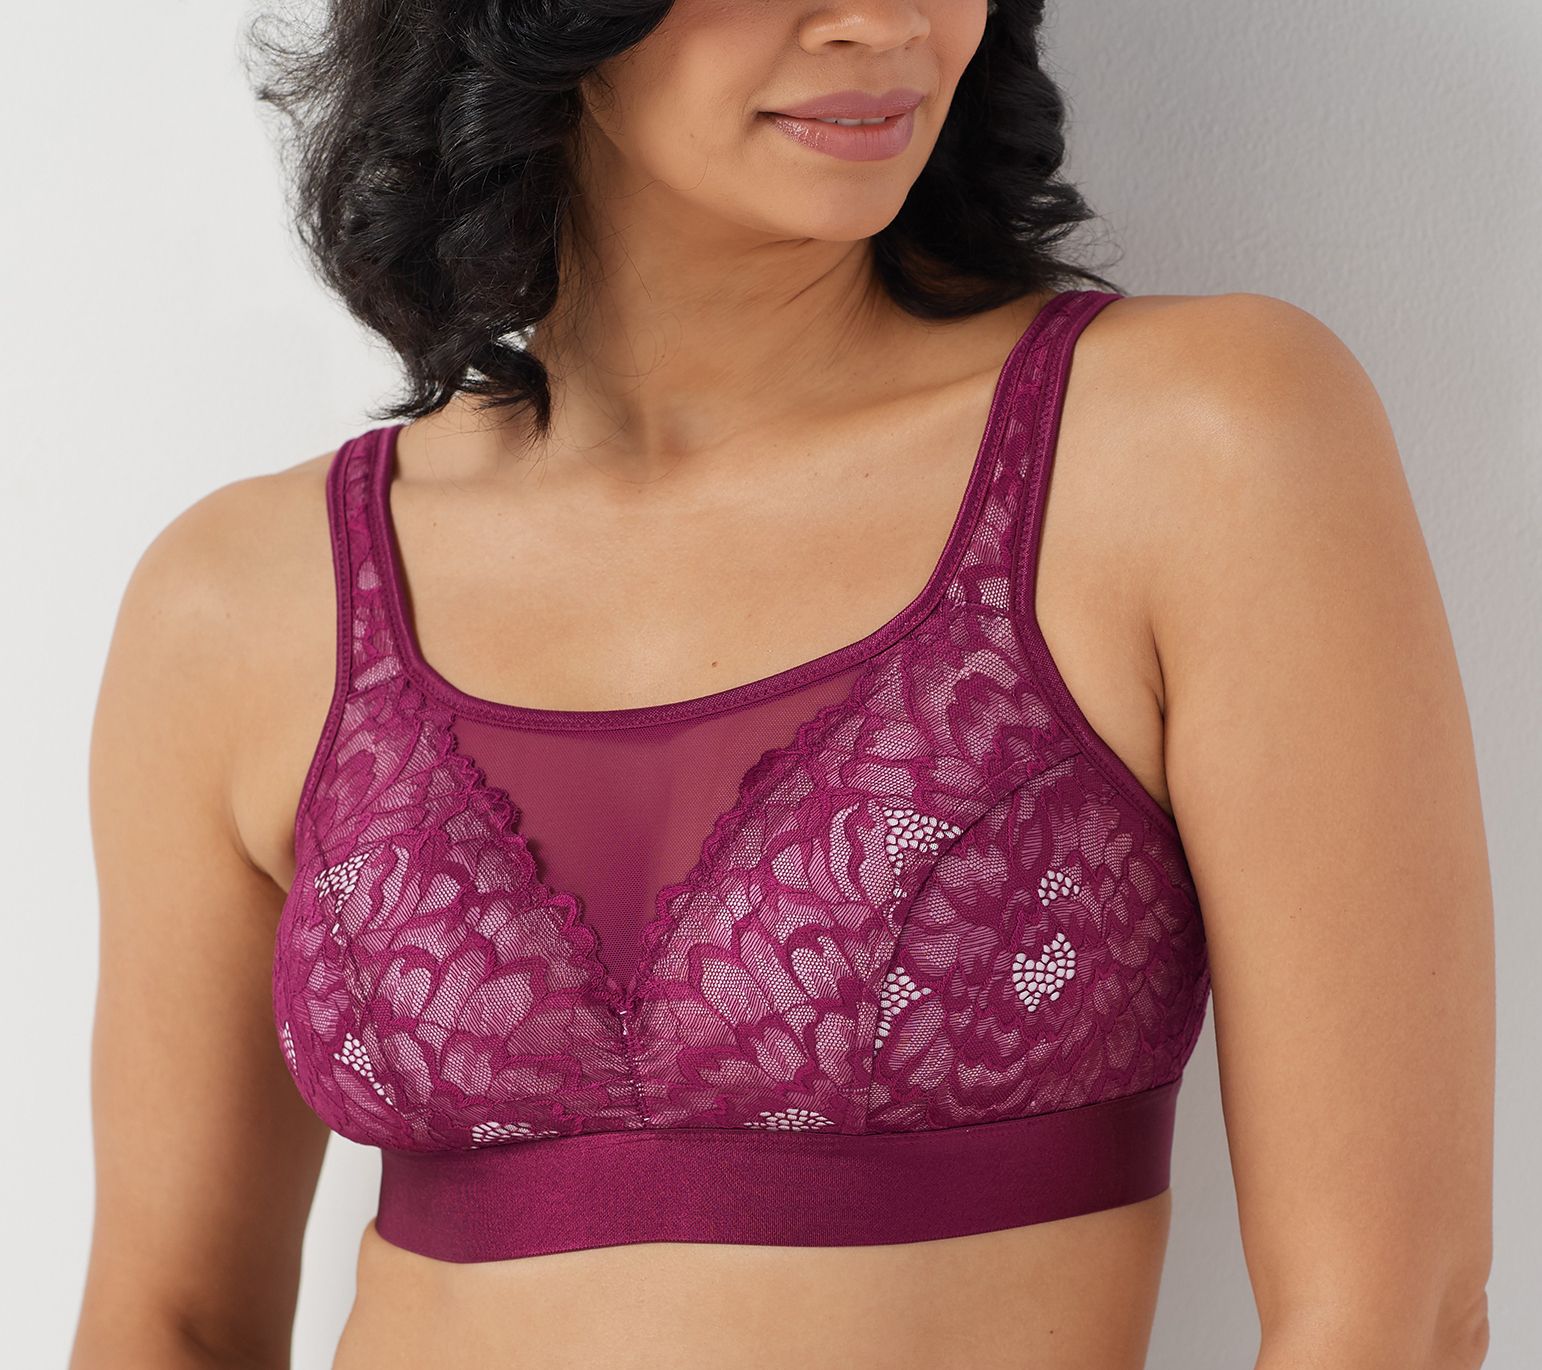 Breezies Lace Overlay Bralette 